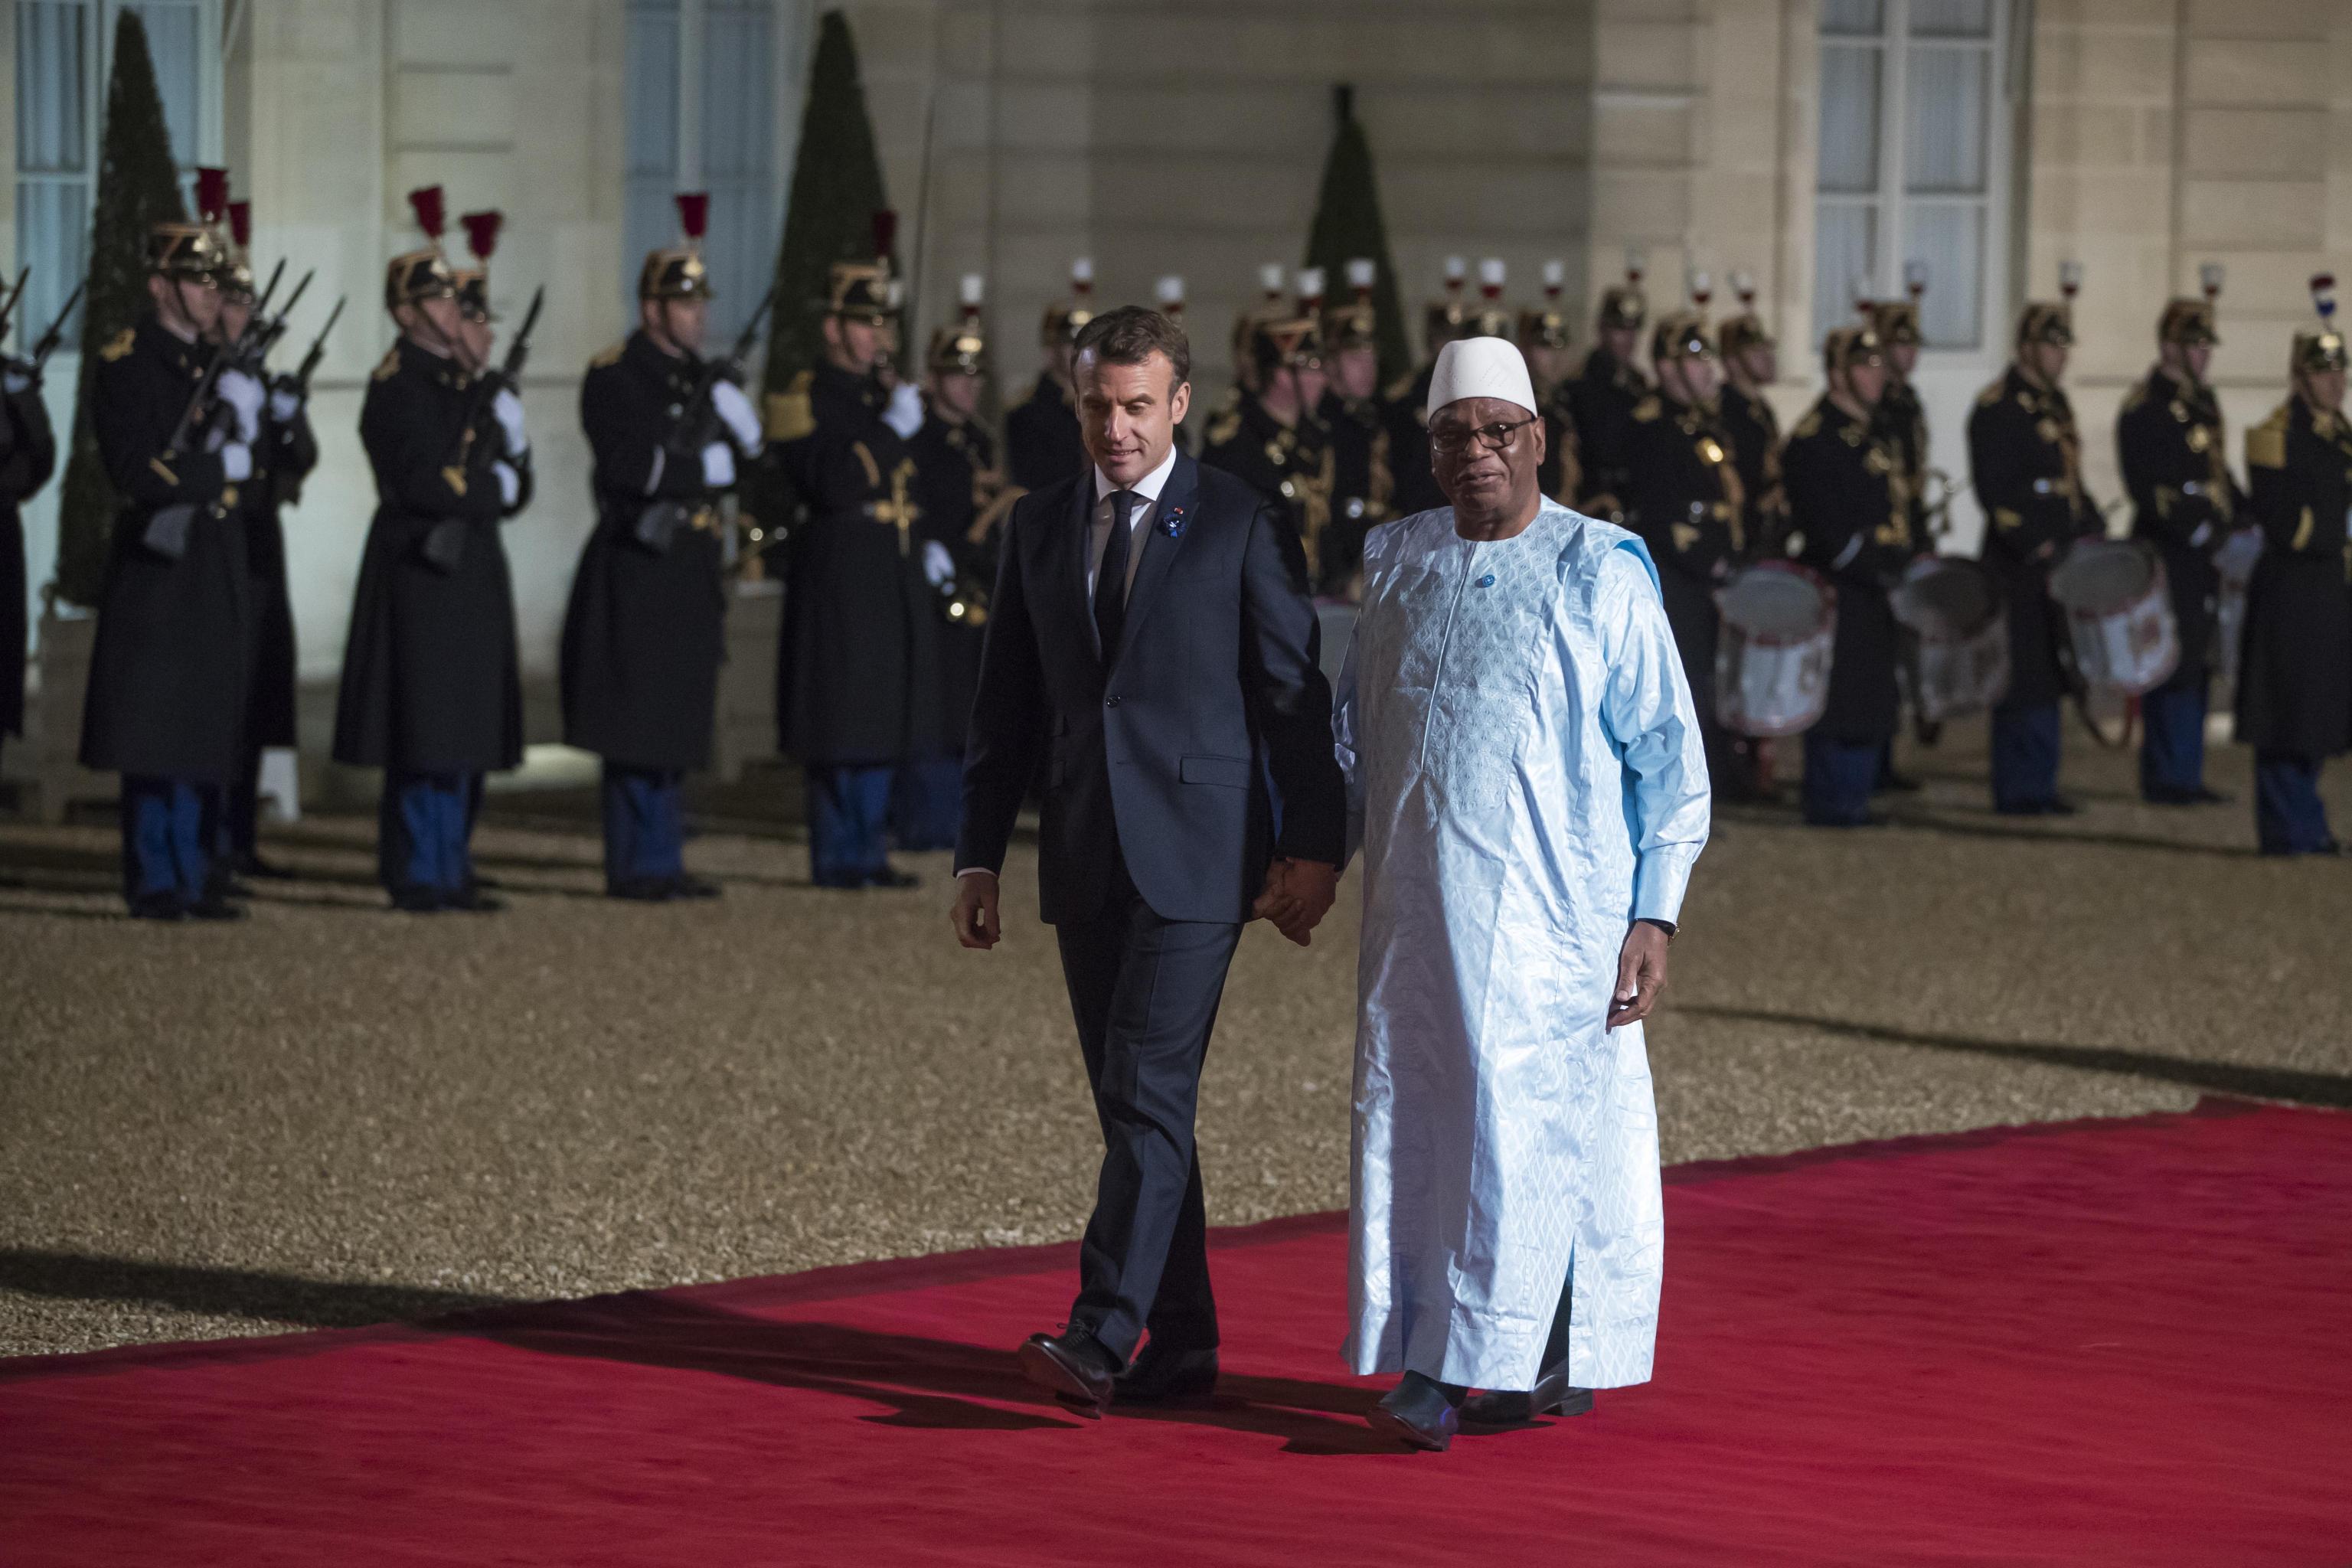 epa07989442 French President Emmanuel Macron (L) welcomes Mali President Ibrahim Boubacar Keita (R) for a dinner held with participants of the Paris Peace Forum, at the Elysee Palace, in Paris, France, 11 November 2019.  EPA/CHRISTOPHE PETIT TESSON